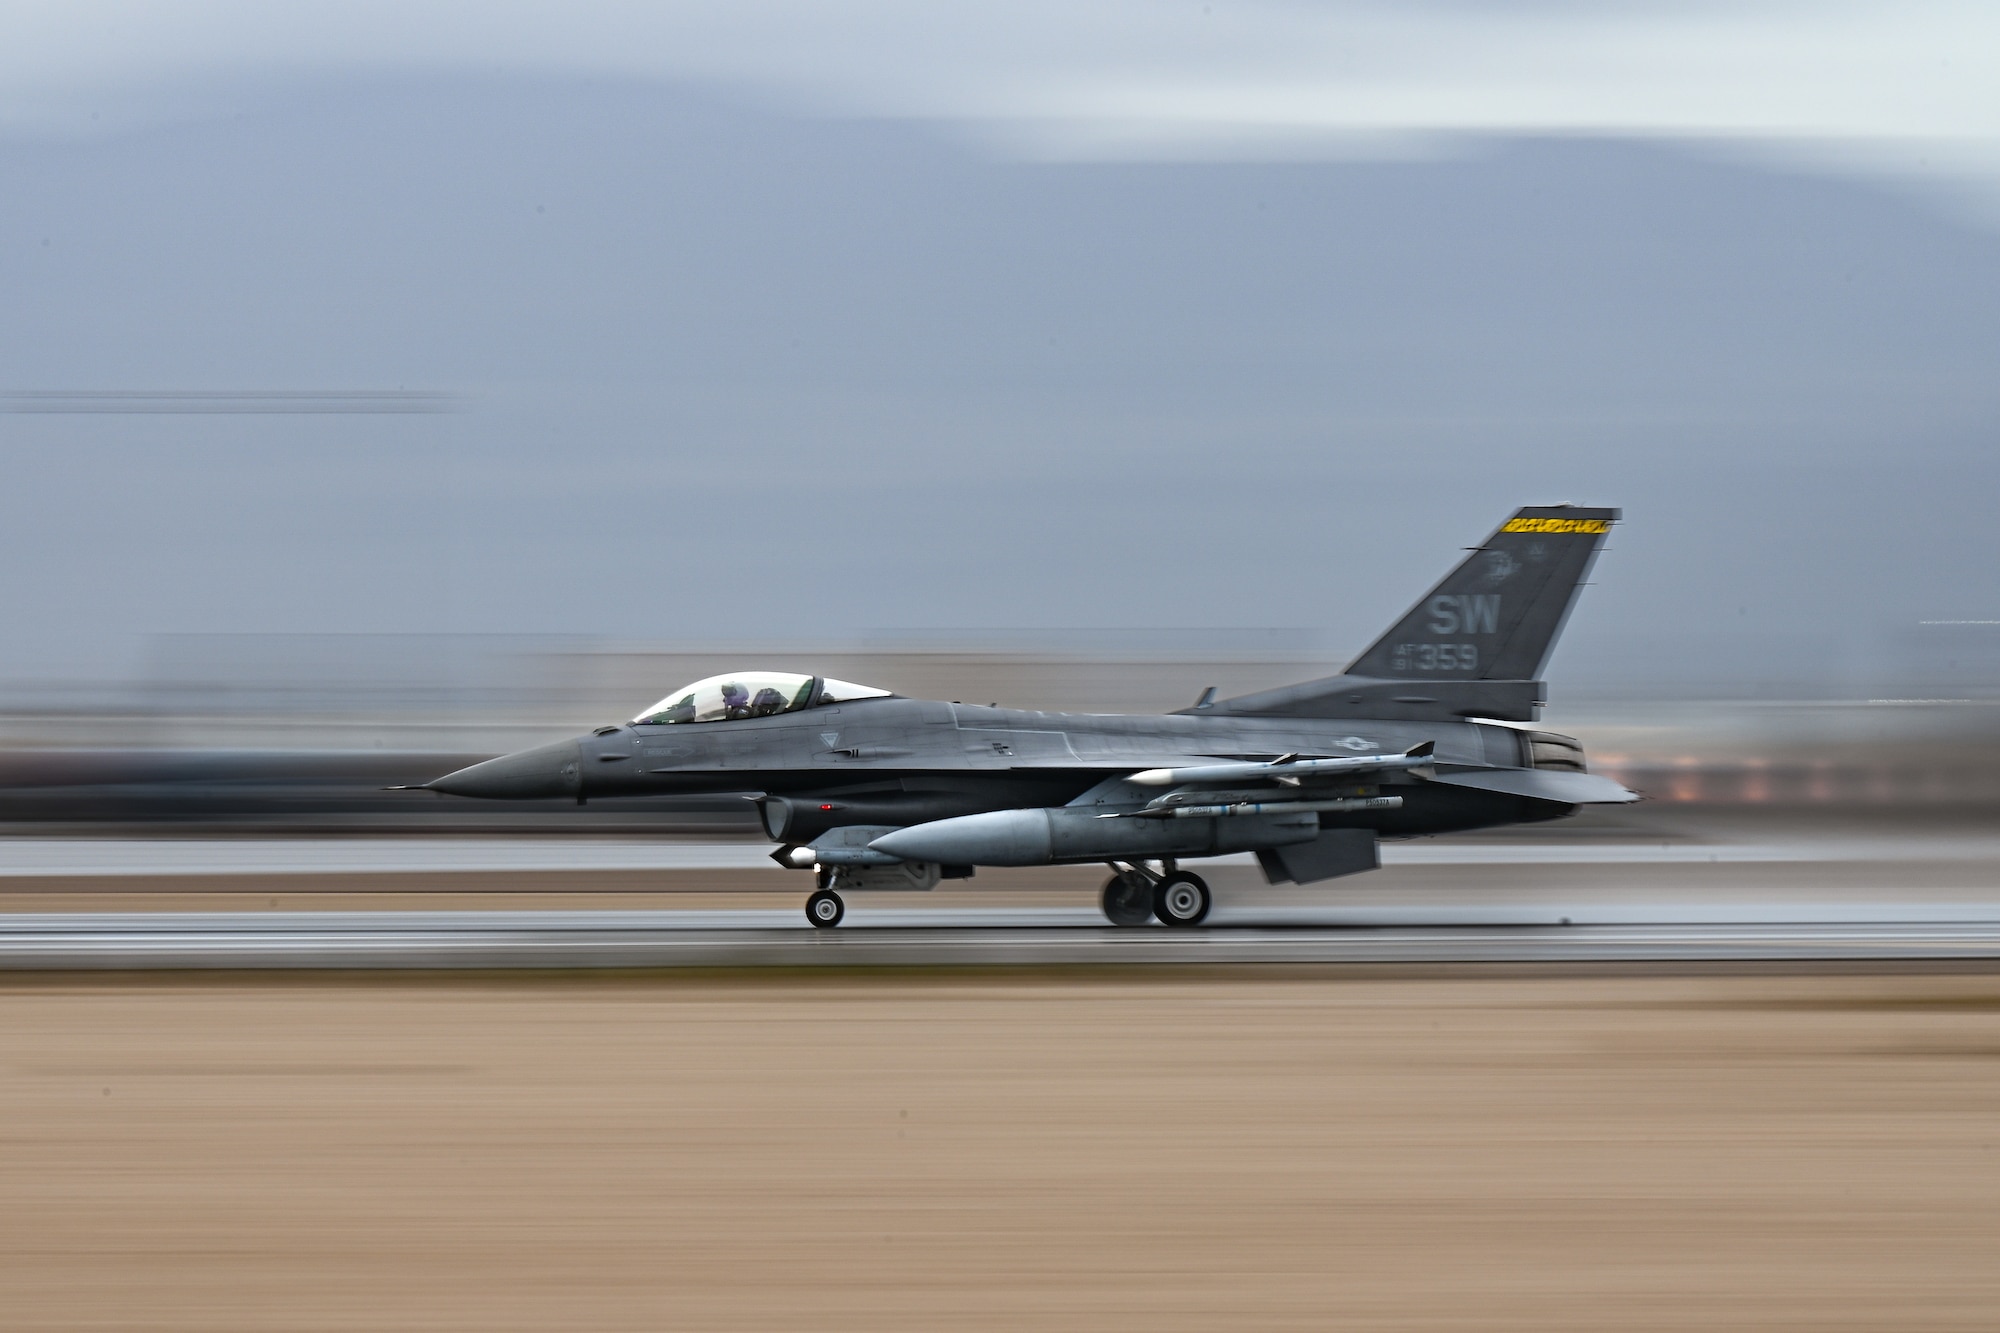 A U.S. Air Force F-16C Fighting Falcon assigned to the 79th Fighter Squadron at Shaw Air Force Base, S.C., takes off from the flightline during exercise Red Flag-Nellis (RF-N) 23-2 at Nellis Air Force Base, Nevada, March 14, 2023. RF-N 23-2 provides a challenging and dynamic environment for the 20th Fighter Wing pilots and aircrew by bringing air forces and airframes from around the world together multiple times a year to integrate as a team during simulated wartime operations, ensuring seamless interoperability for potential future conflicts. (U.S. Air Force photo by Staff Sgt. Madeline Herzog)